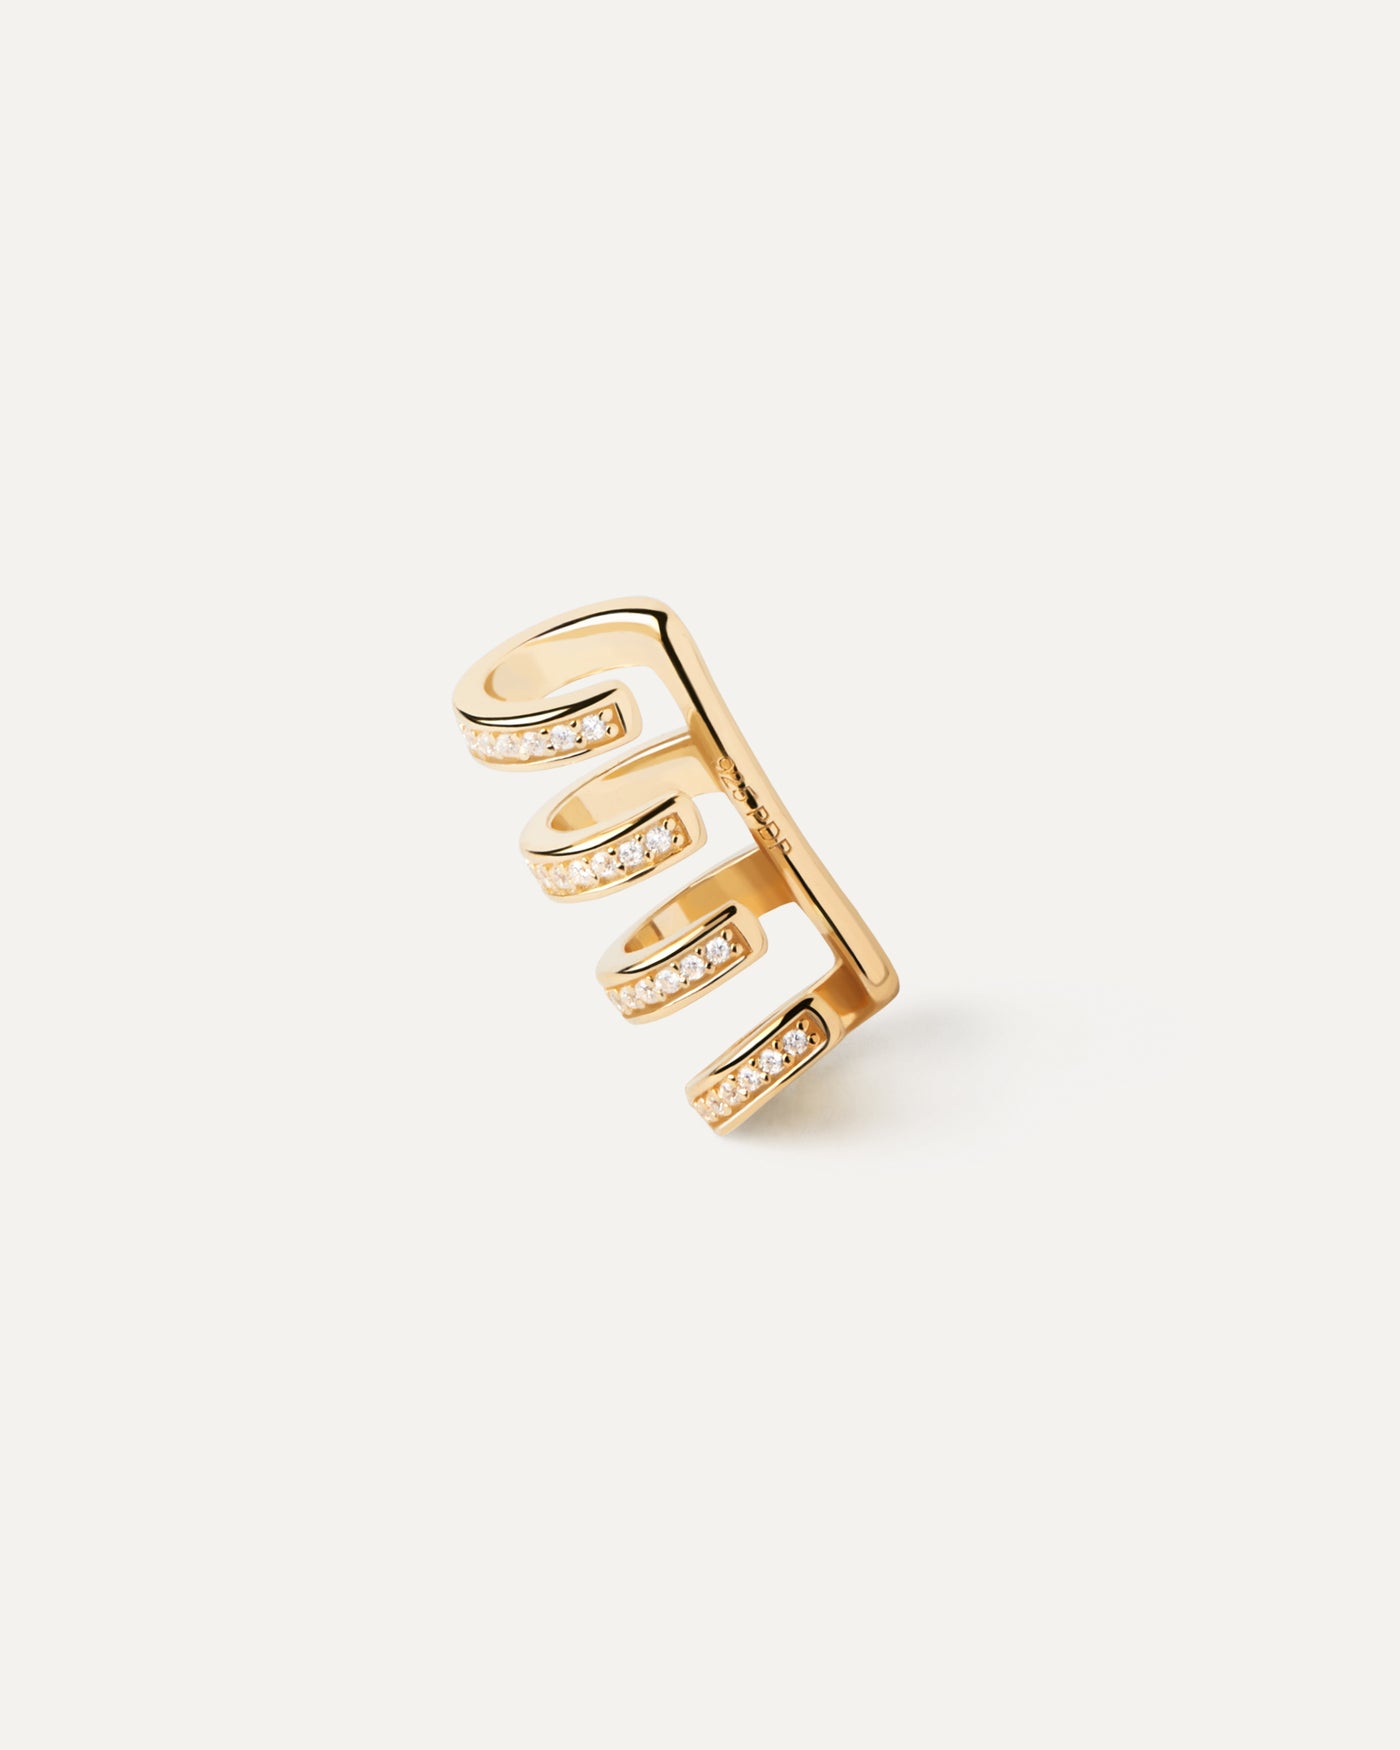 2023 Selection | Thunder Ear Cuff. Gold-plated bold four band ear cuff set with white zirconia. Get the latest arrival from PDPAOLA. Place your order safely and get this Best Seller. Free Shipping.